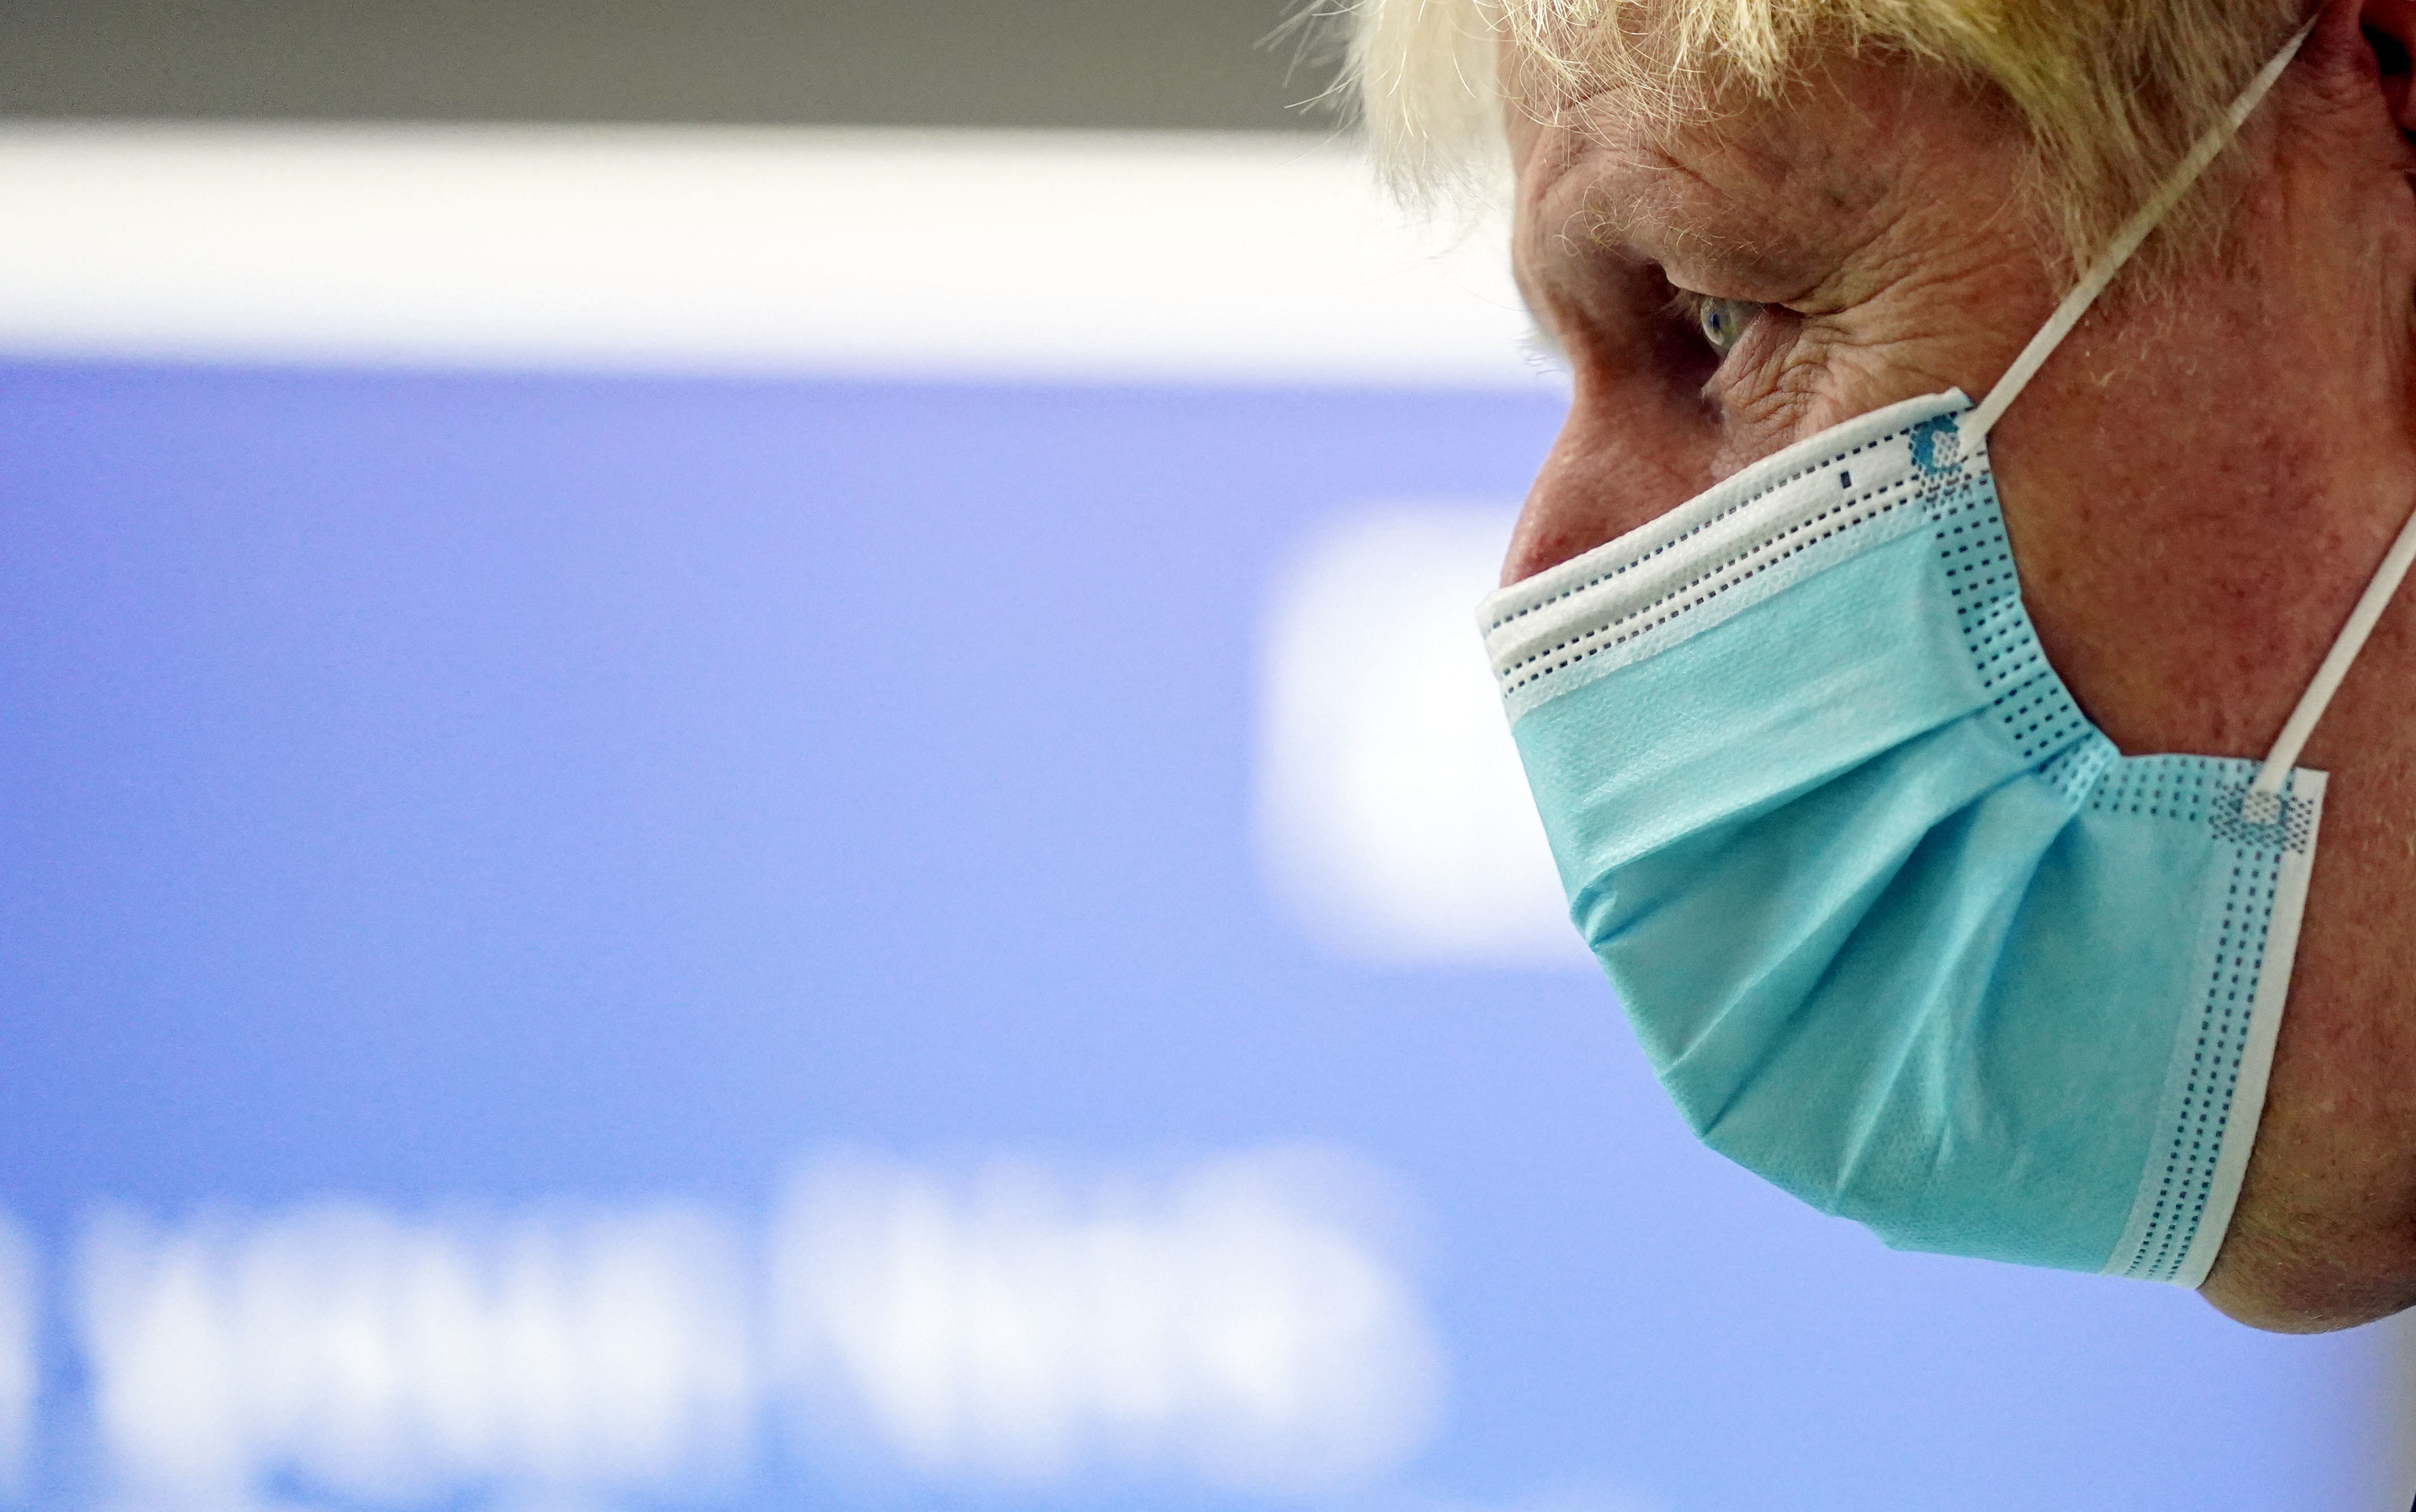 Prime Minister Boris Johnson, wearing a face covering to mitigate the spread of coronavirus, reacts during his visit to a Covid-19 vaccination hub in the Guttman Centre at Stoke Mandeville Stadium in Aylesbury, north west of London on January 3, 2022.